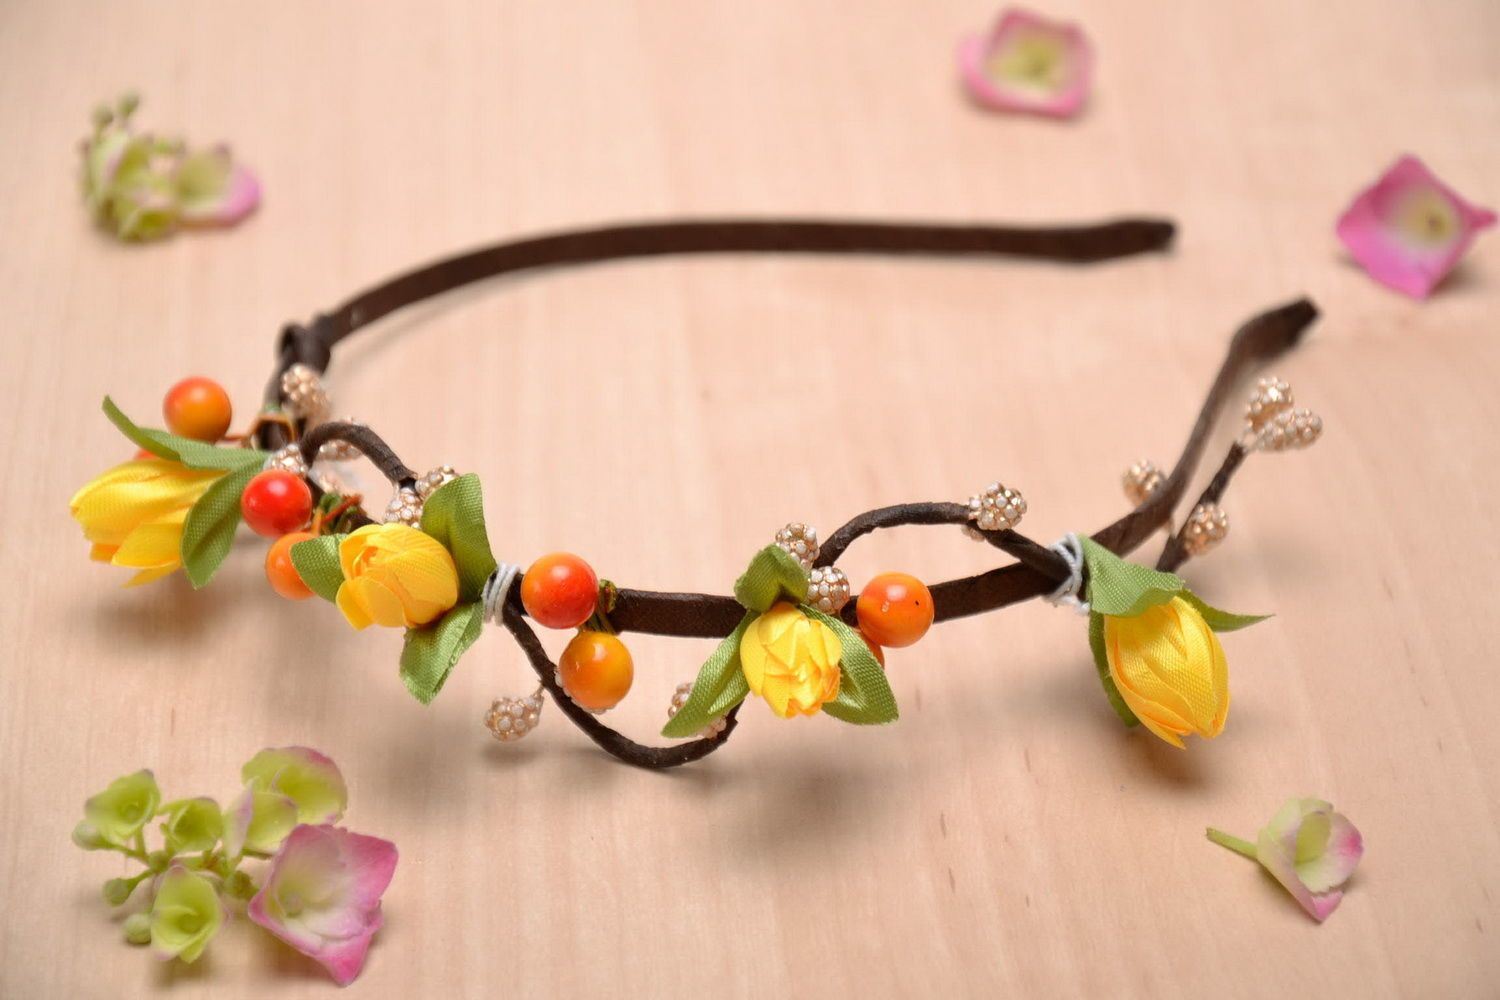 Headband made from flowers and berries photo 5